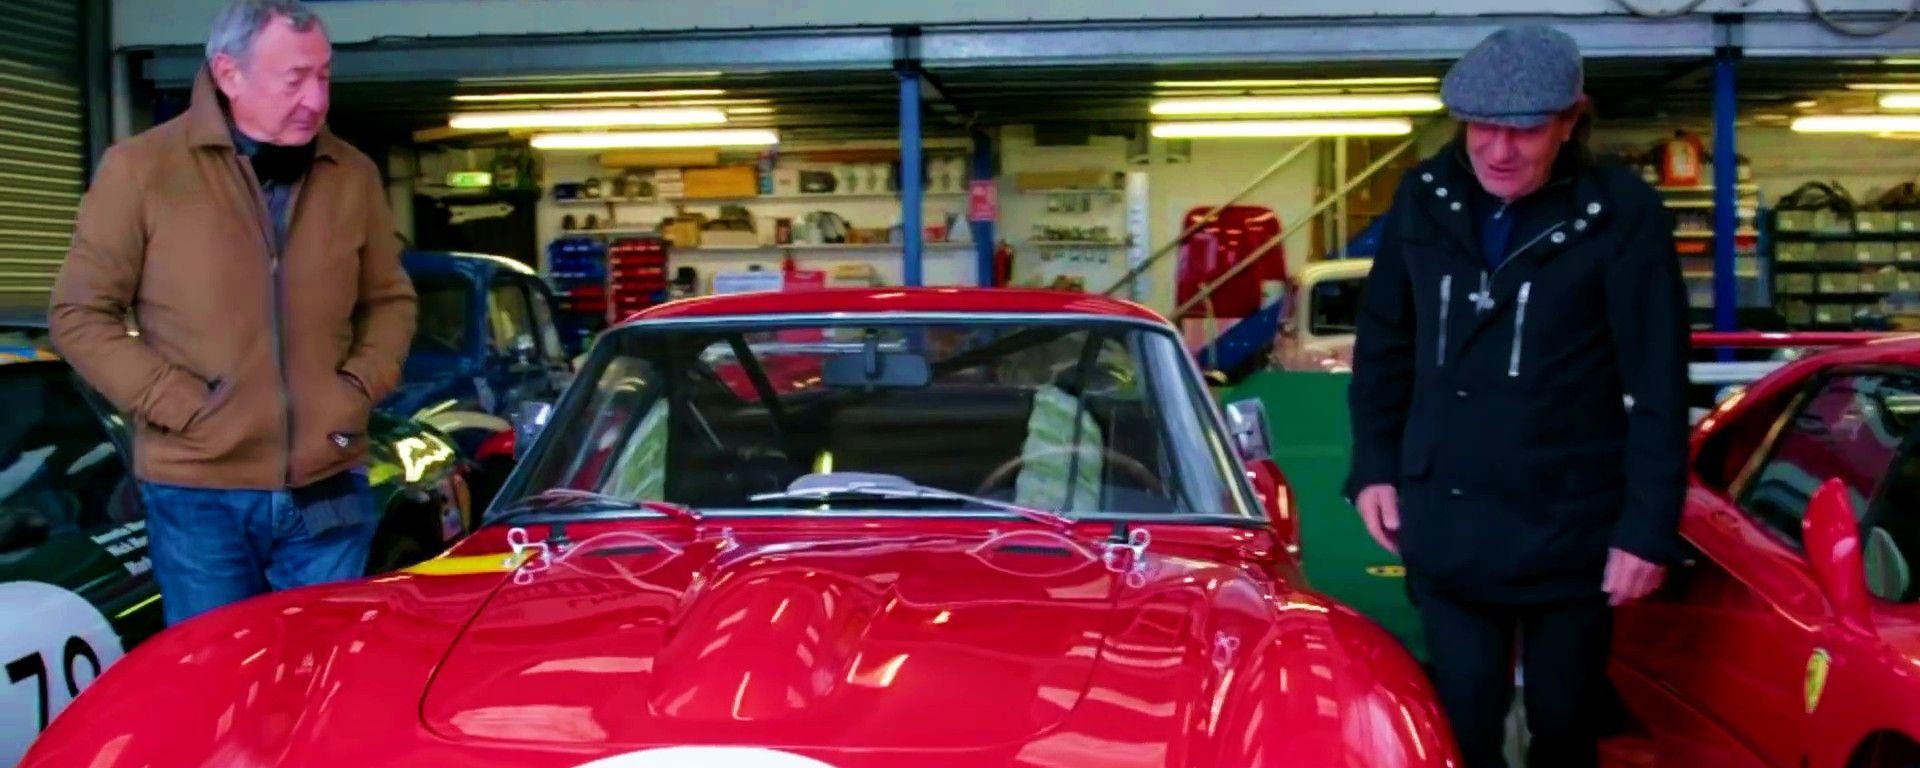 Brian Johnson - lead singer of AC/DC - and Nick Mason, drummer for Pink Floyd, decided to meet up and take this rare red Ferrari for a spin.